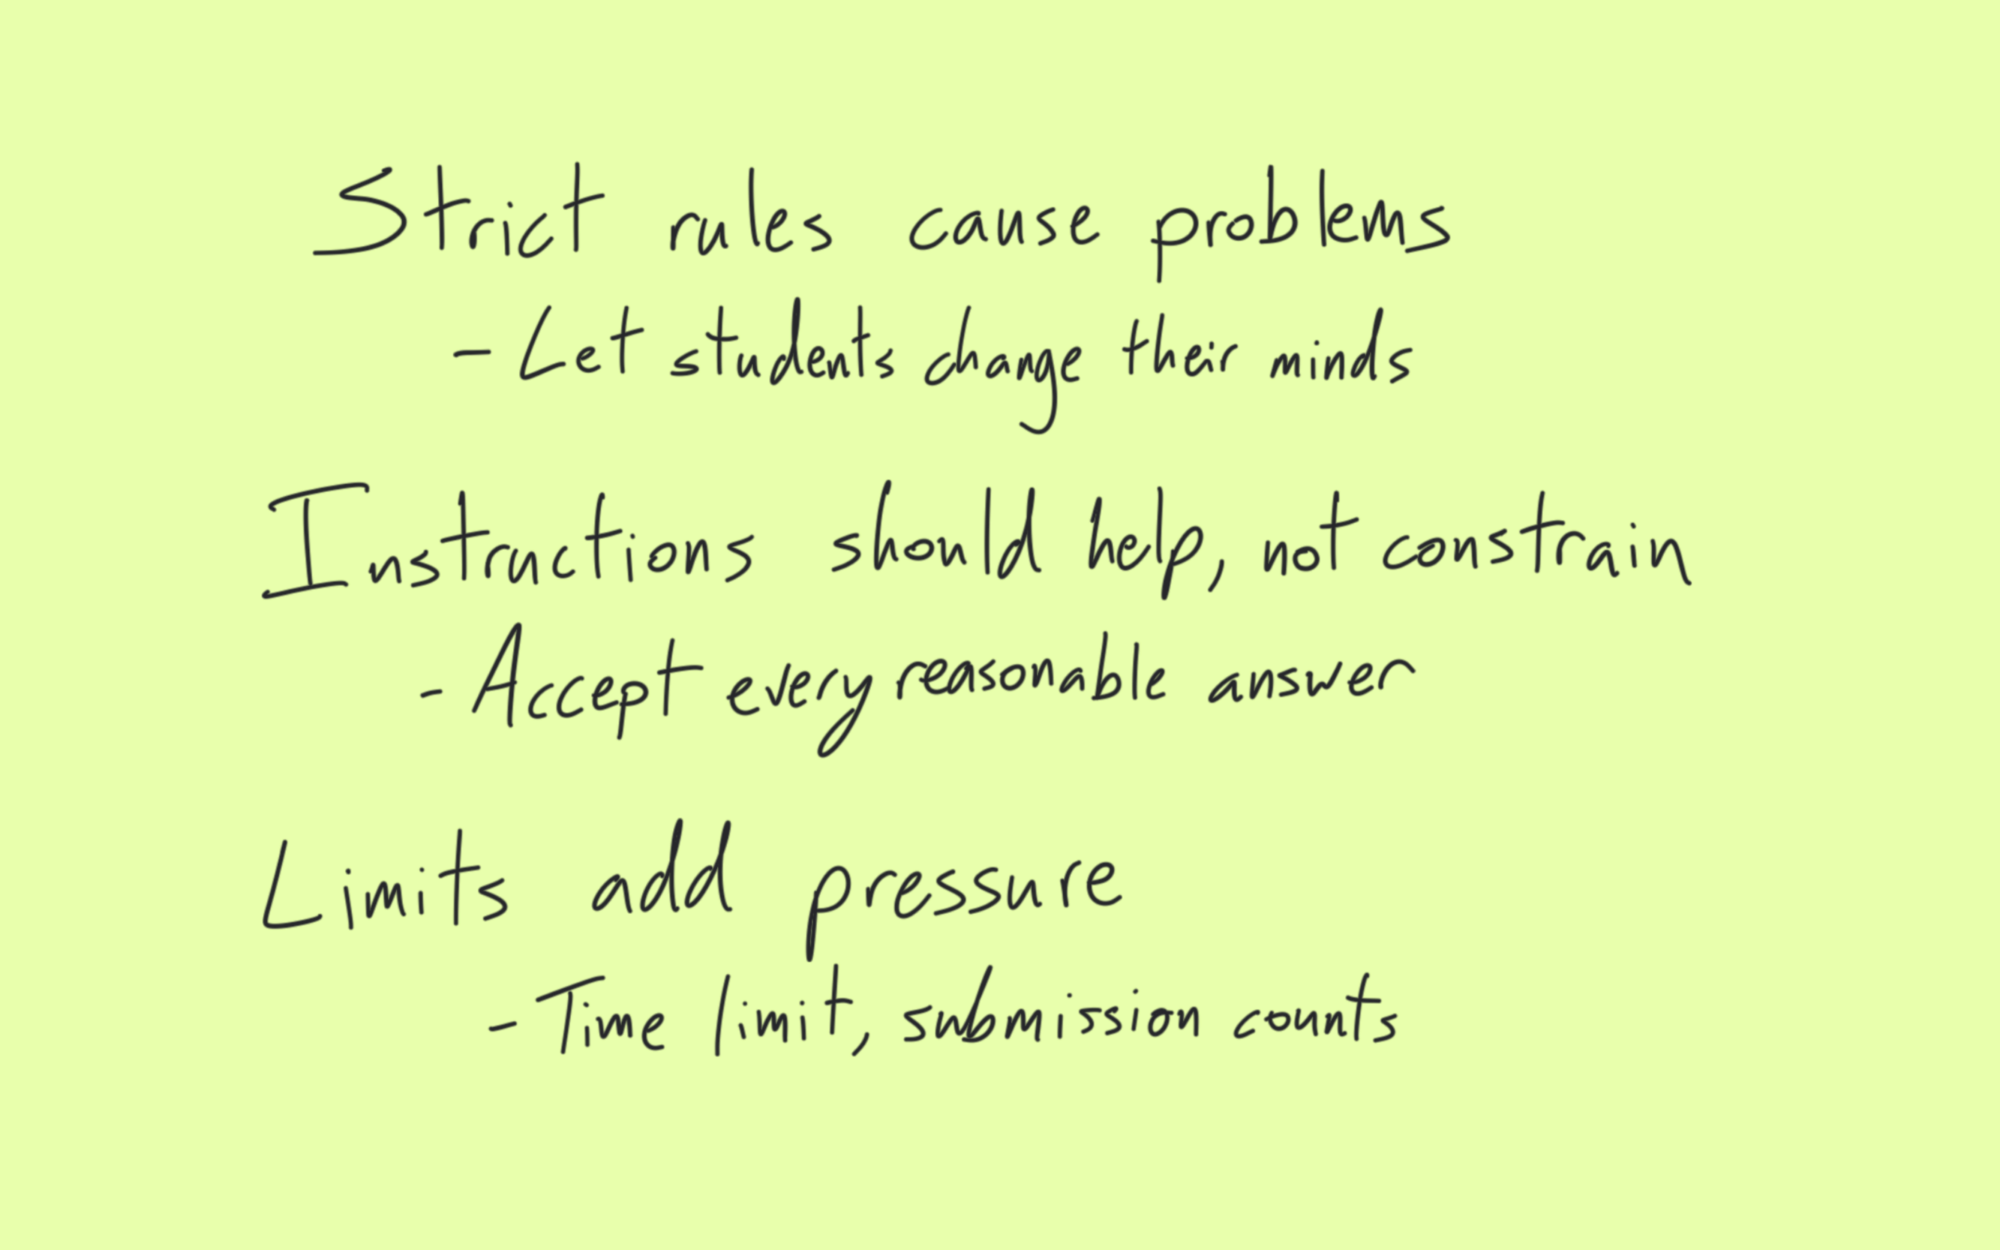 Strict rules cause problems - let students change their minds. Instructions should help, not constrain - accept every reasonable answer. Limits add pressue - time limit, submission counts.